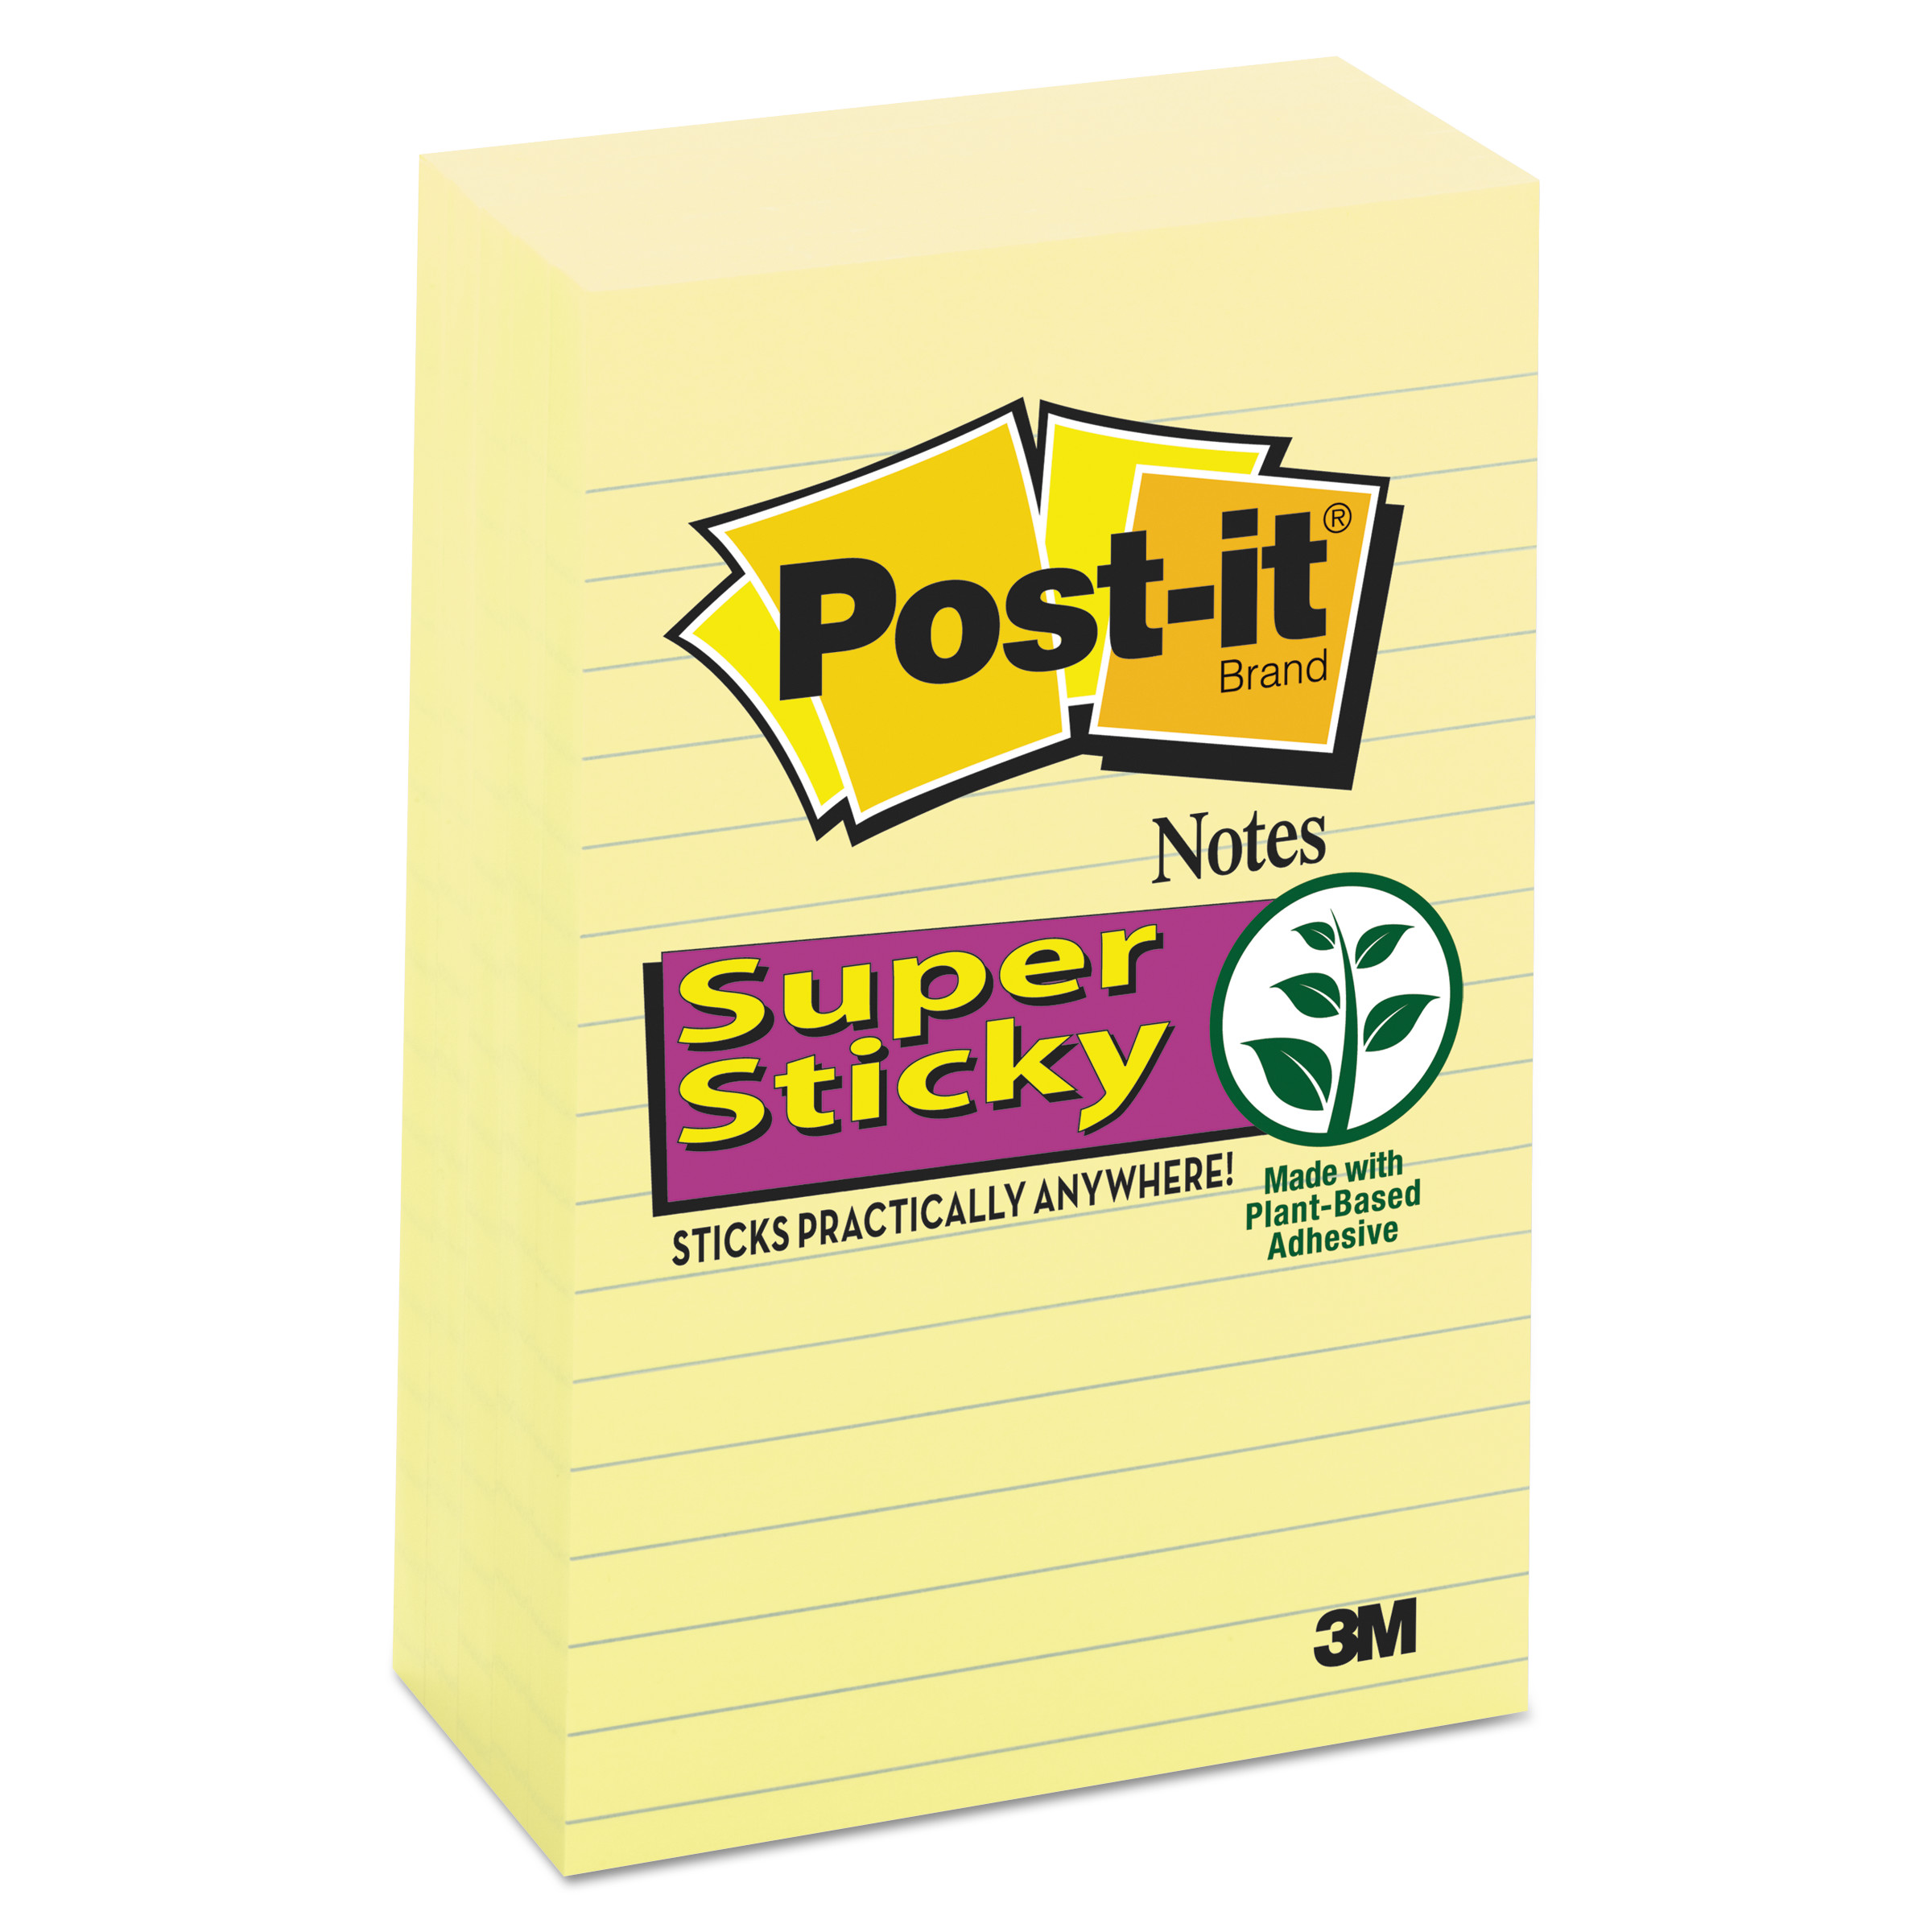 Canary Yellow Note Pads, Lined, 4 x 6, 90-Sheet, 5/Pack